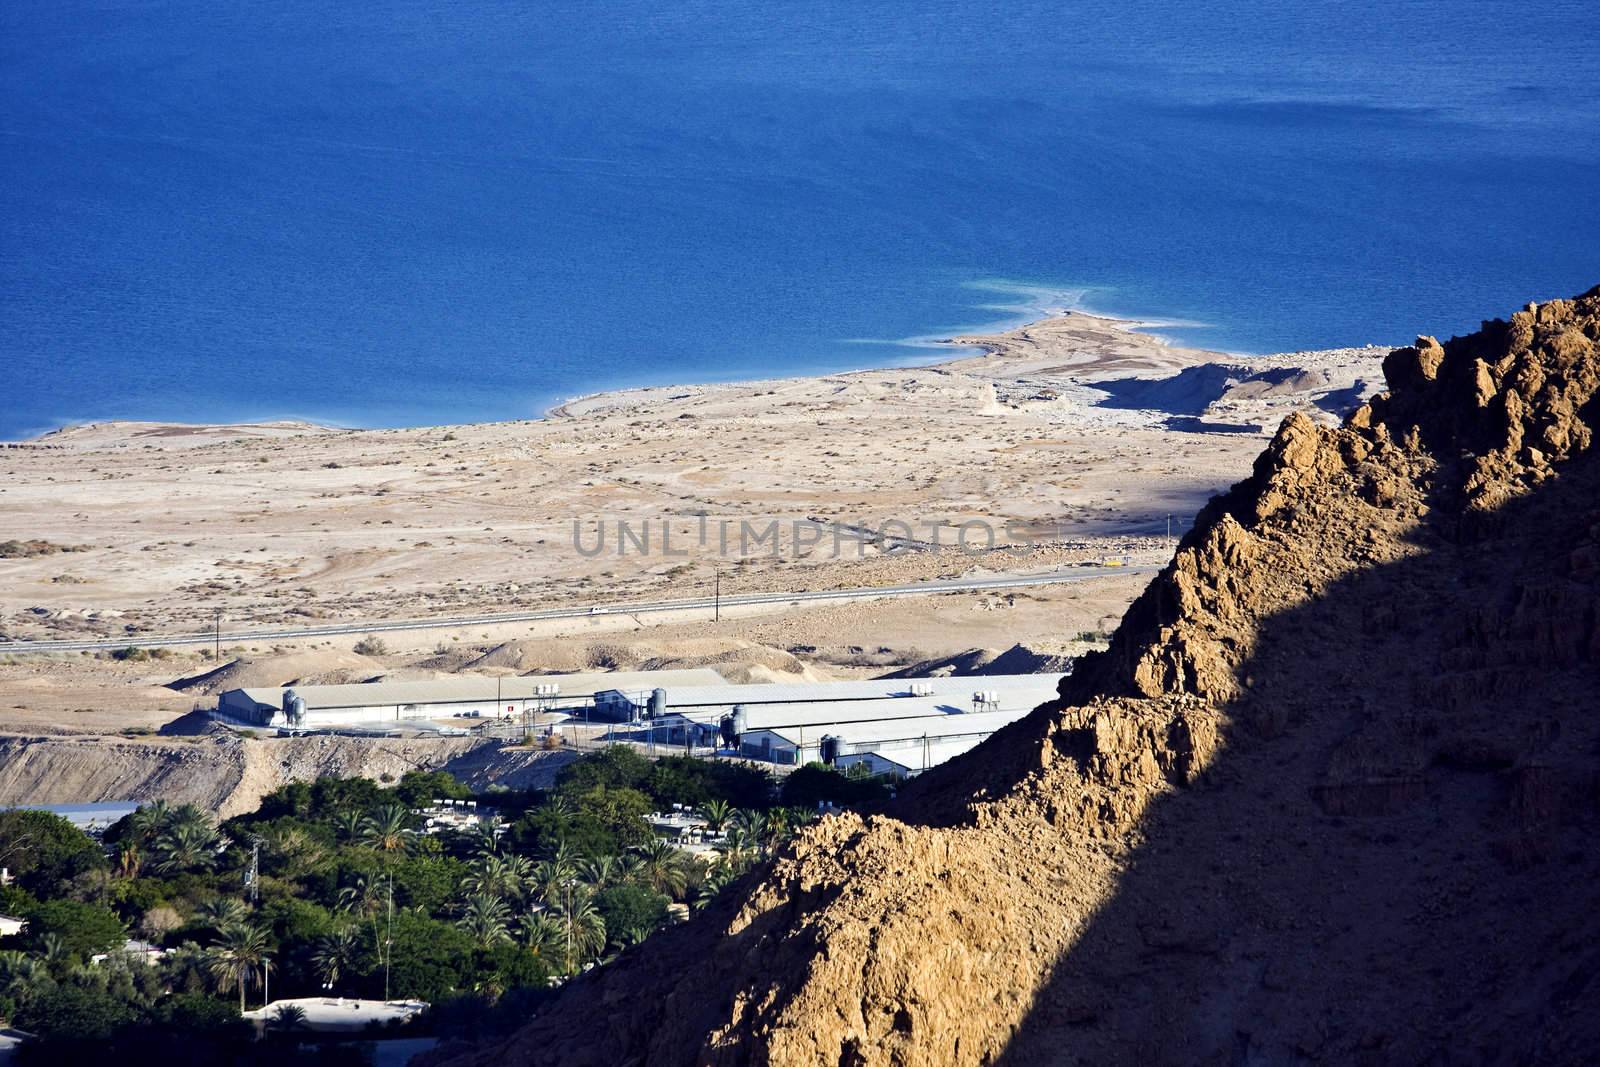 The water of the dead sea from the nearby mountains in Israel